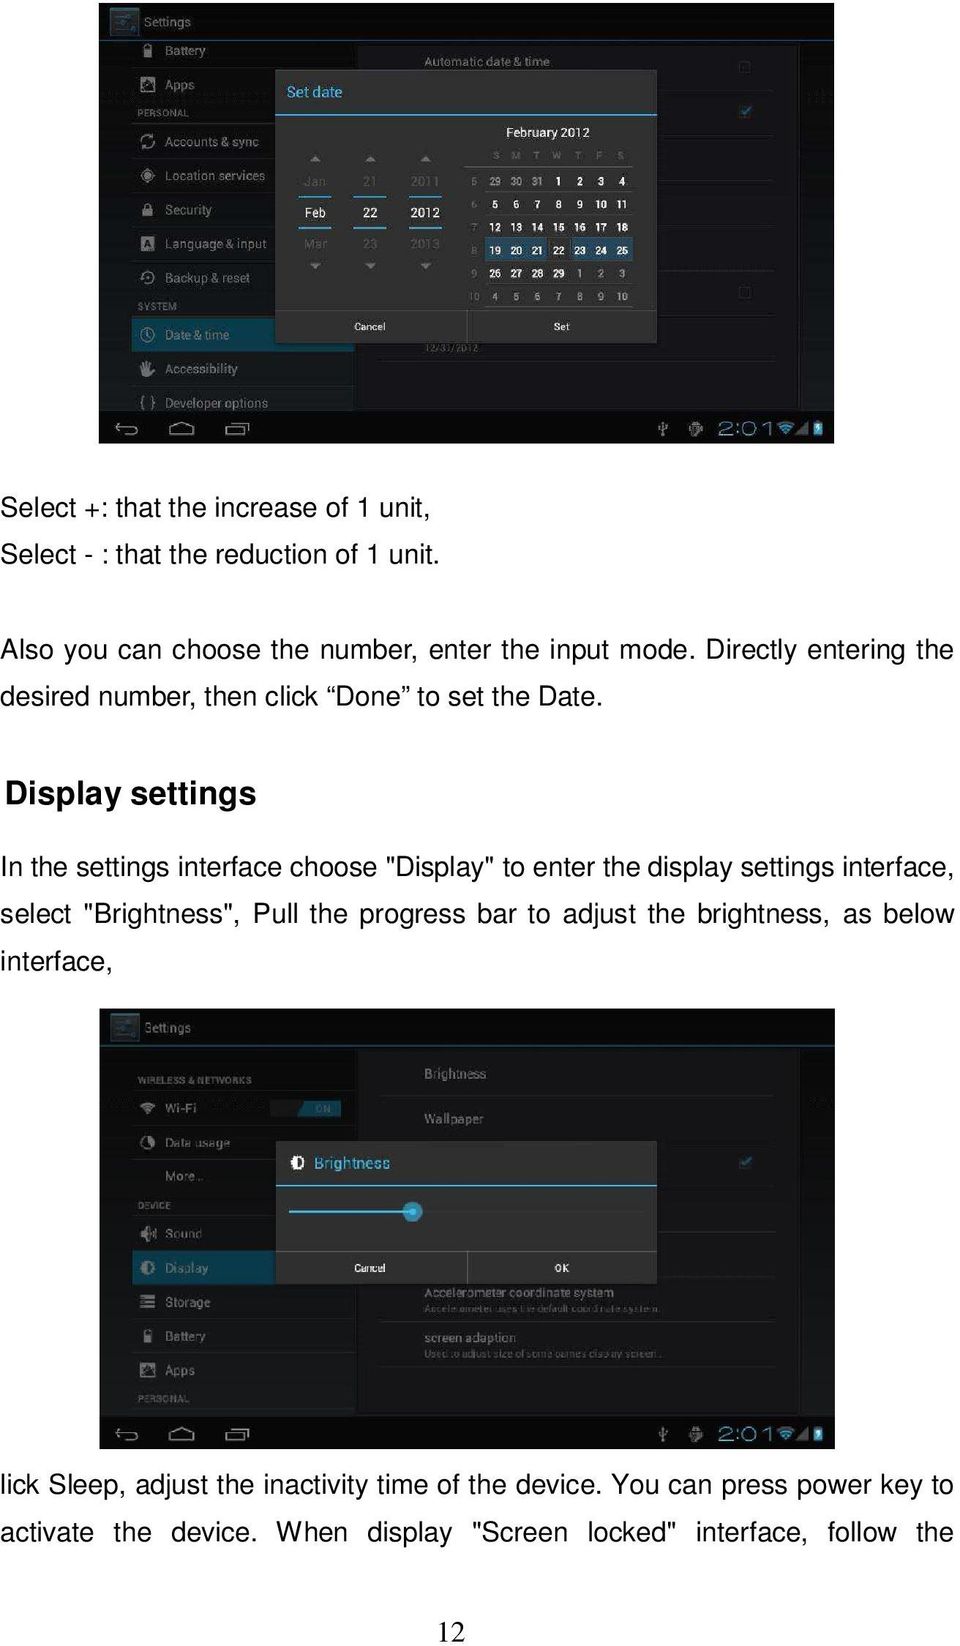 Display settings In the settings interface choose "Display" to enter the display settings interface, select "Brightness", Pull the